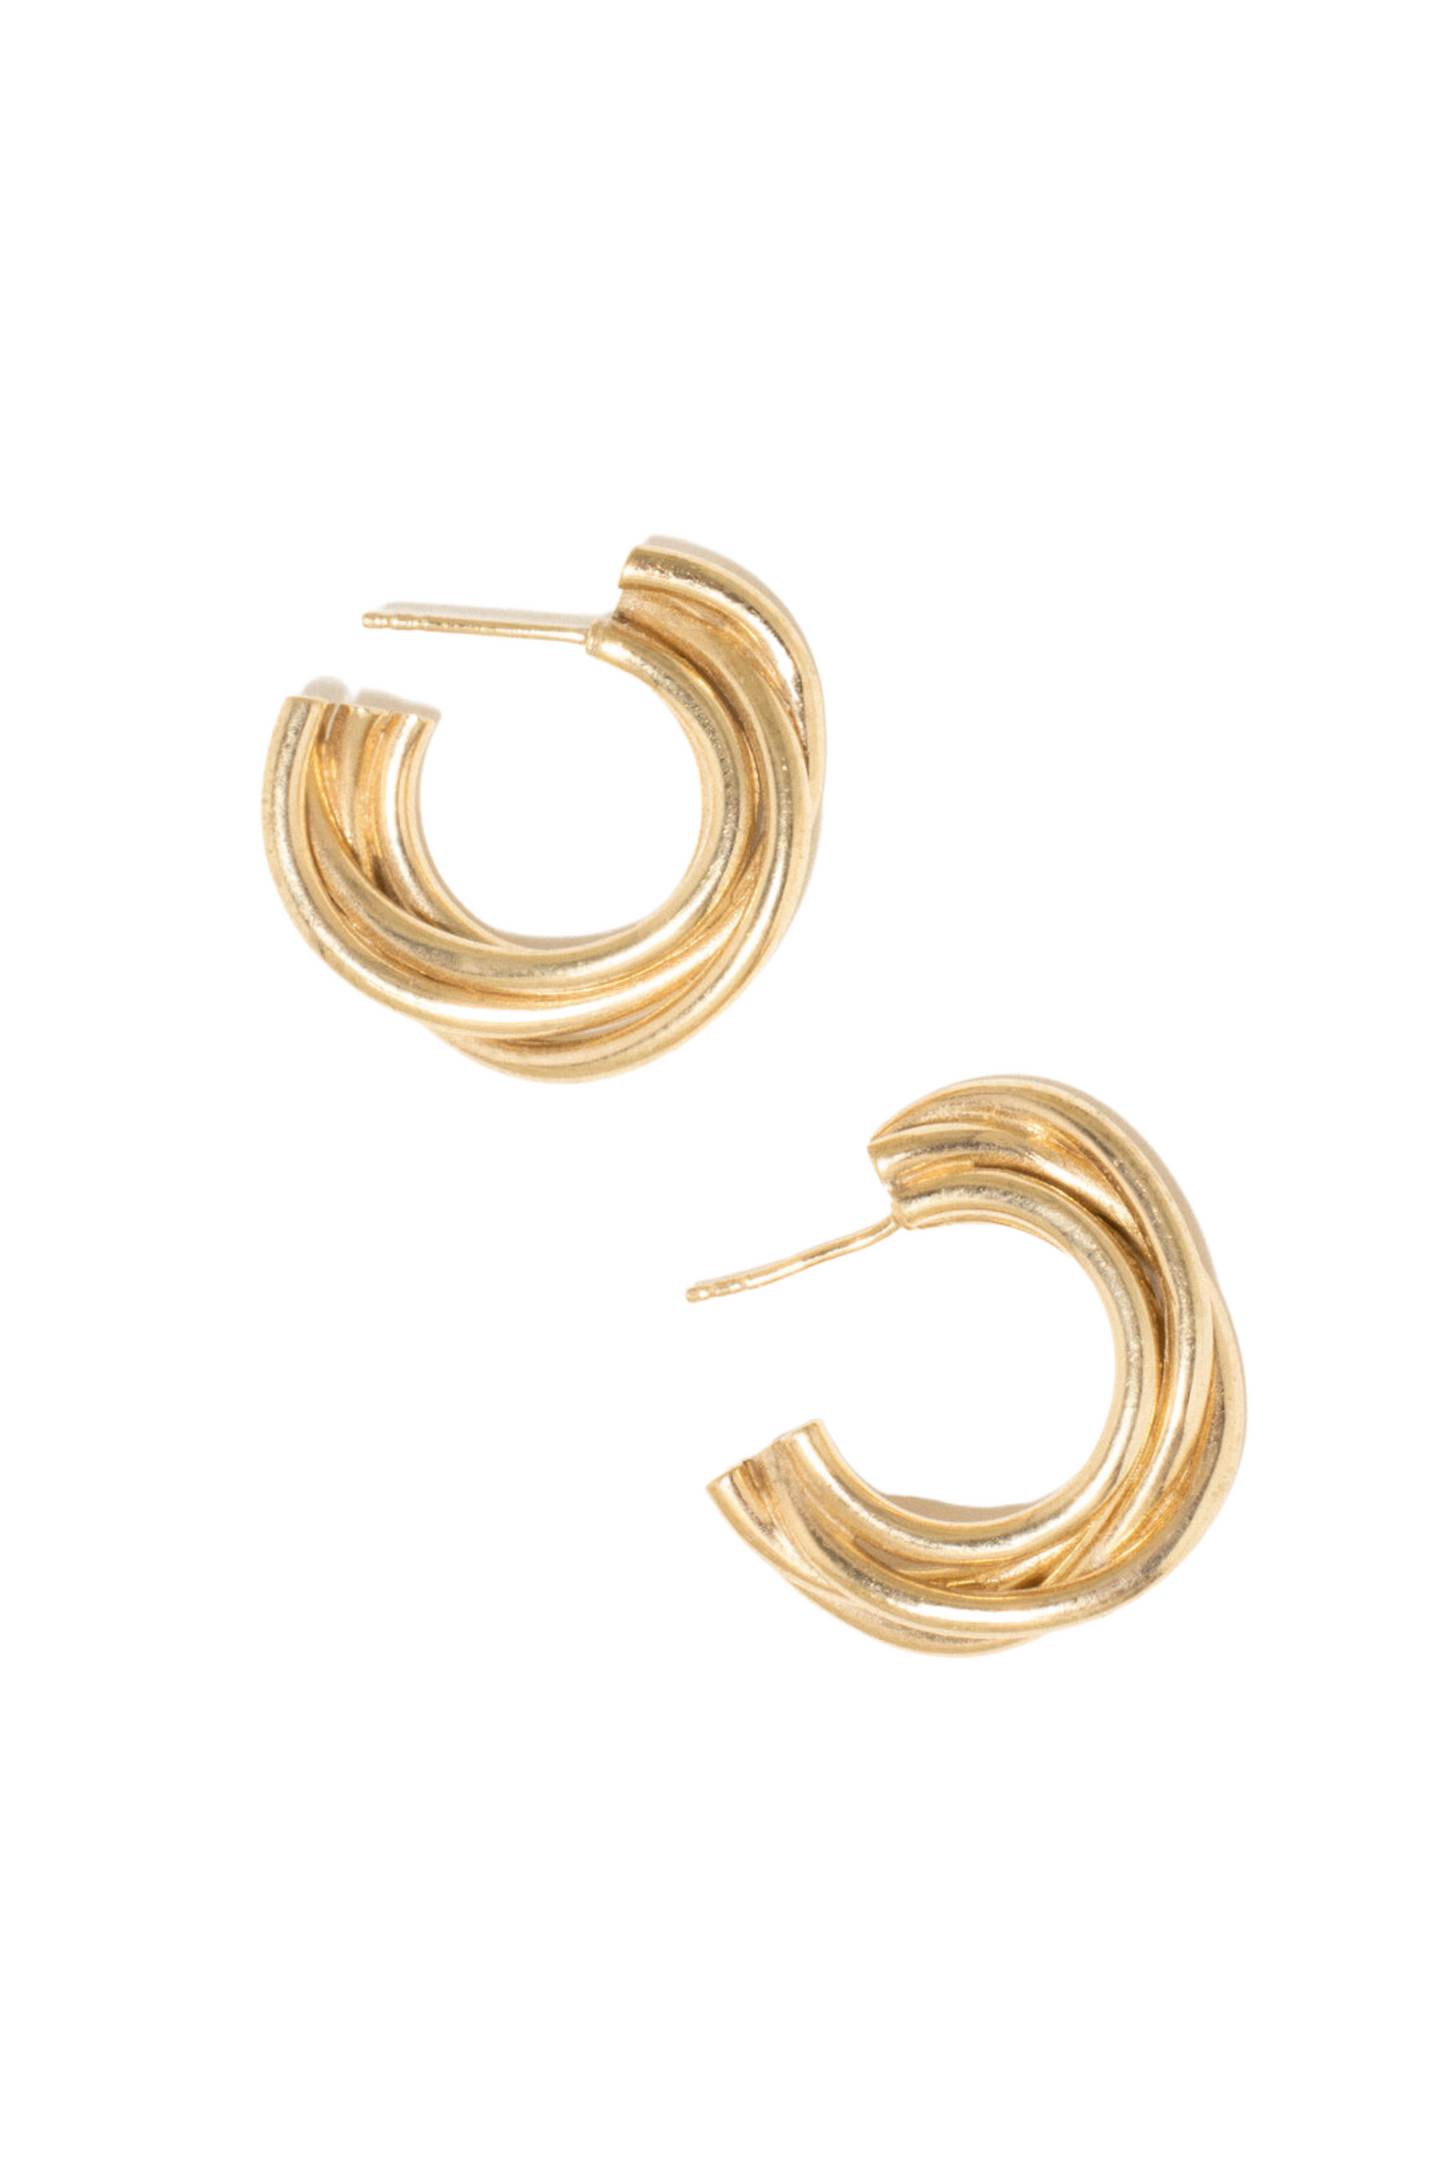 COMPLETED WORKS // GOLD VERMEIL HOOPS